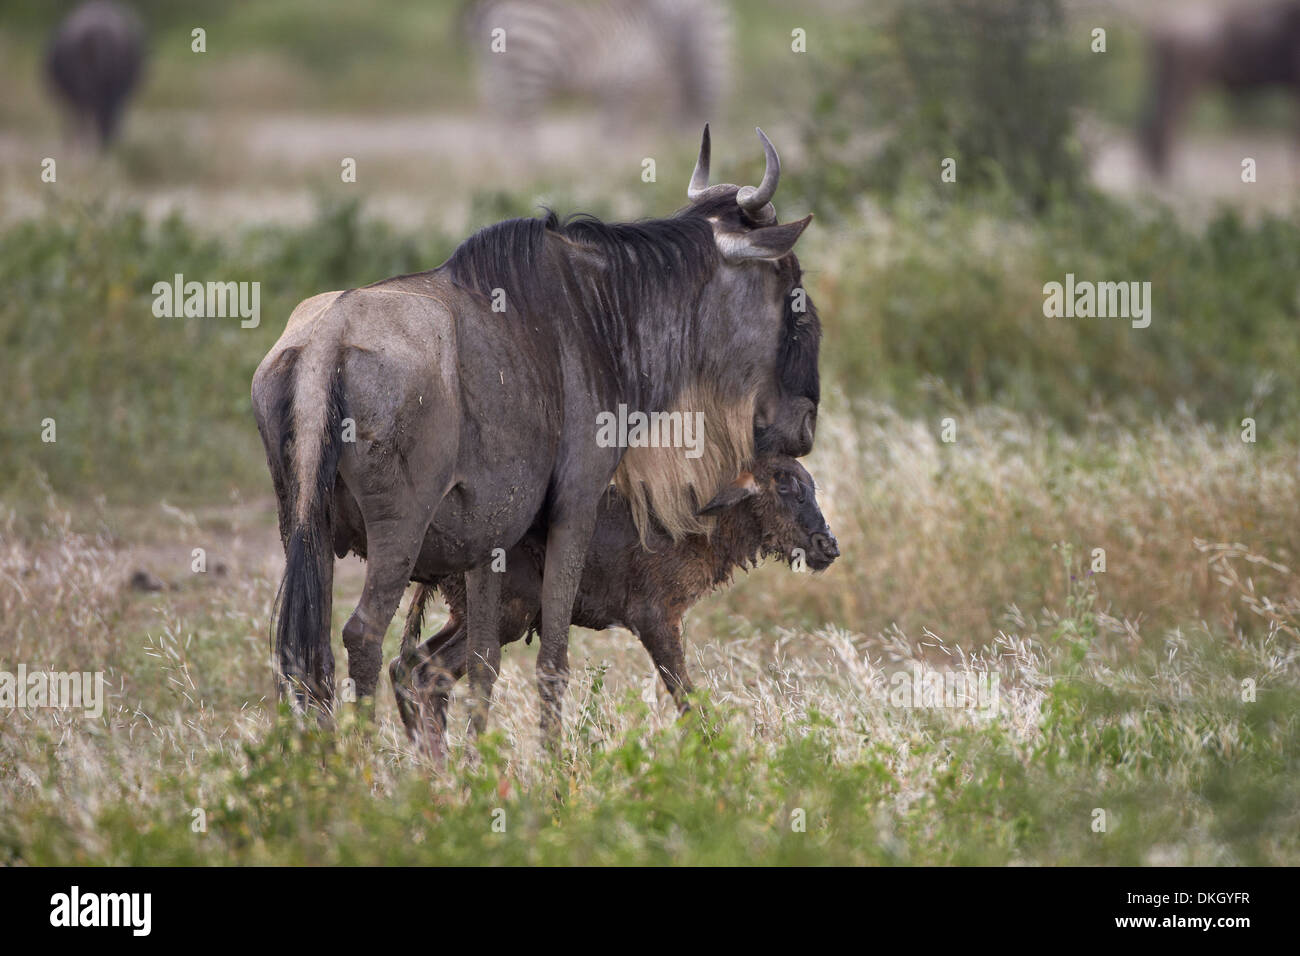 Just-born blue wildebeest (Connochaetes taurinus) standing by its mother, Serengeti National Park, Tanzania, Africa Stock Photo